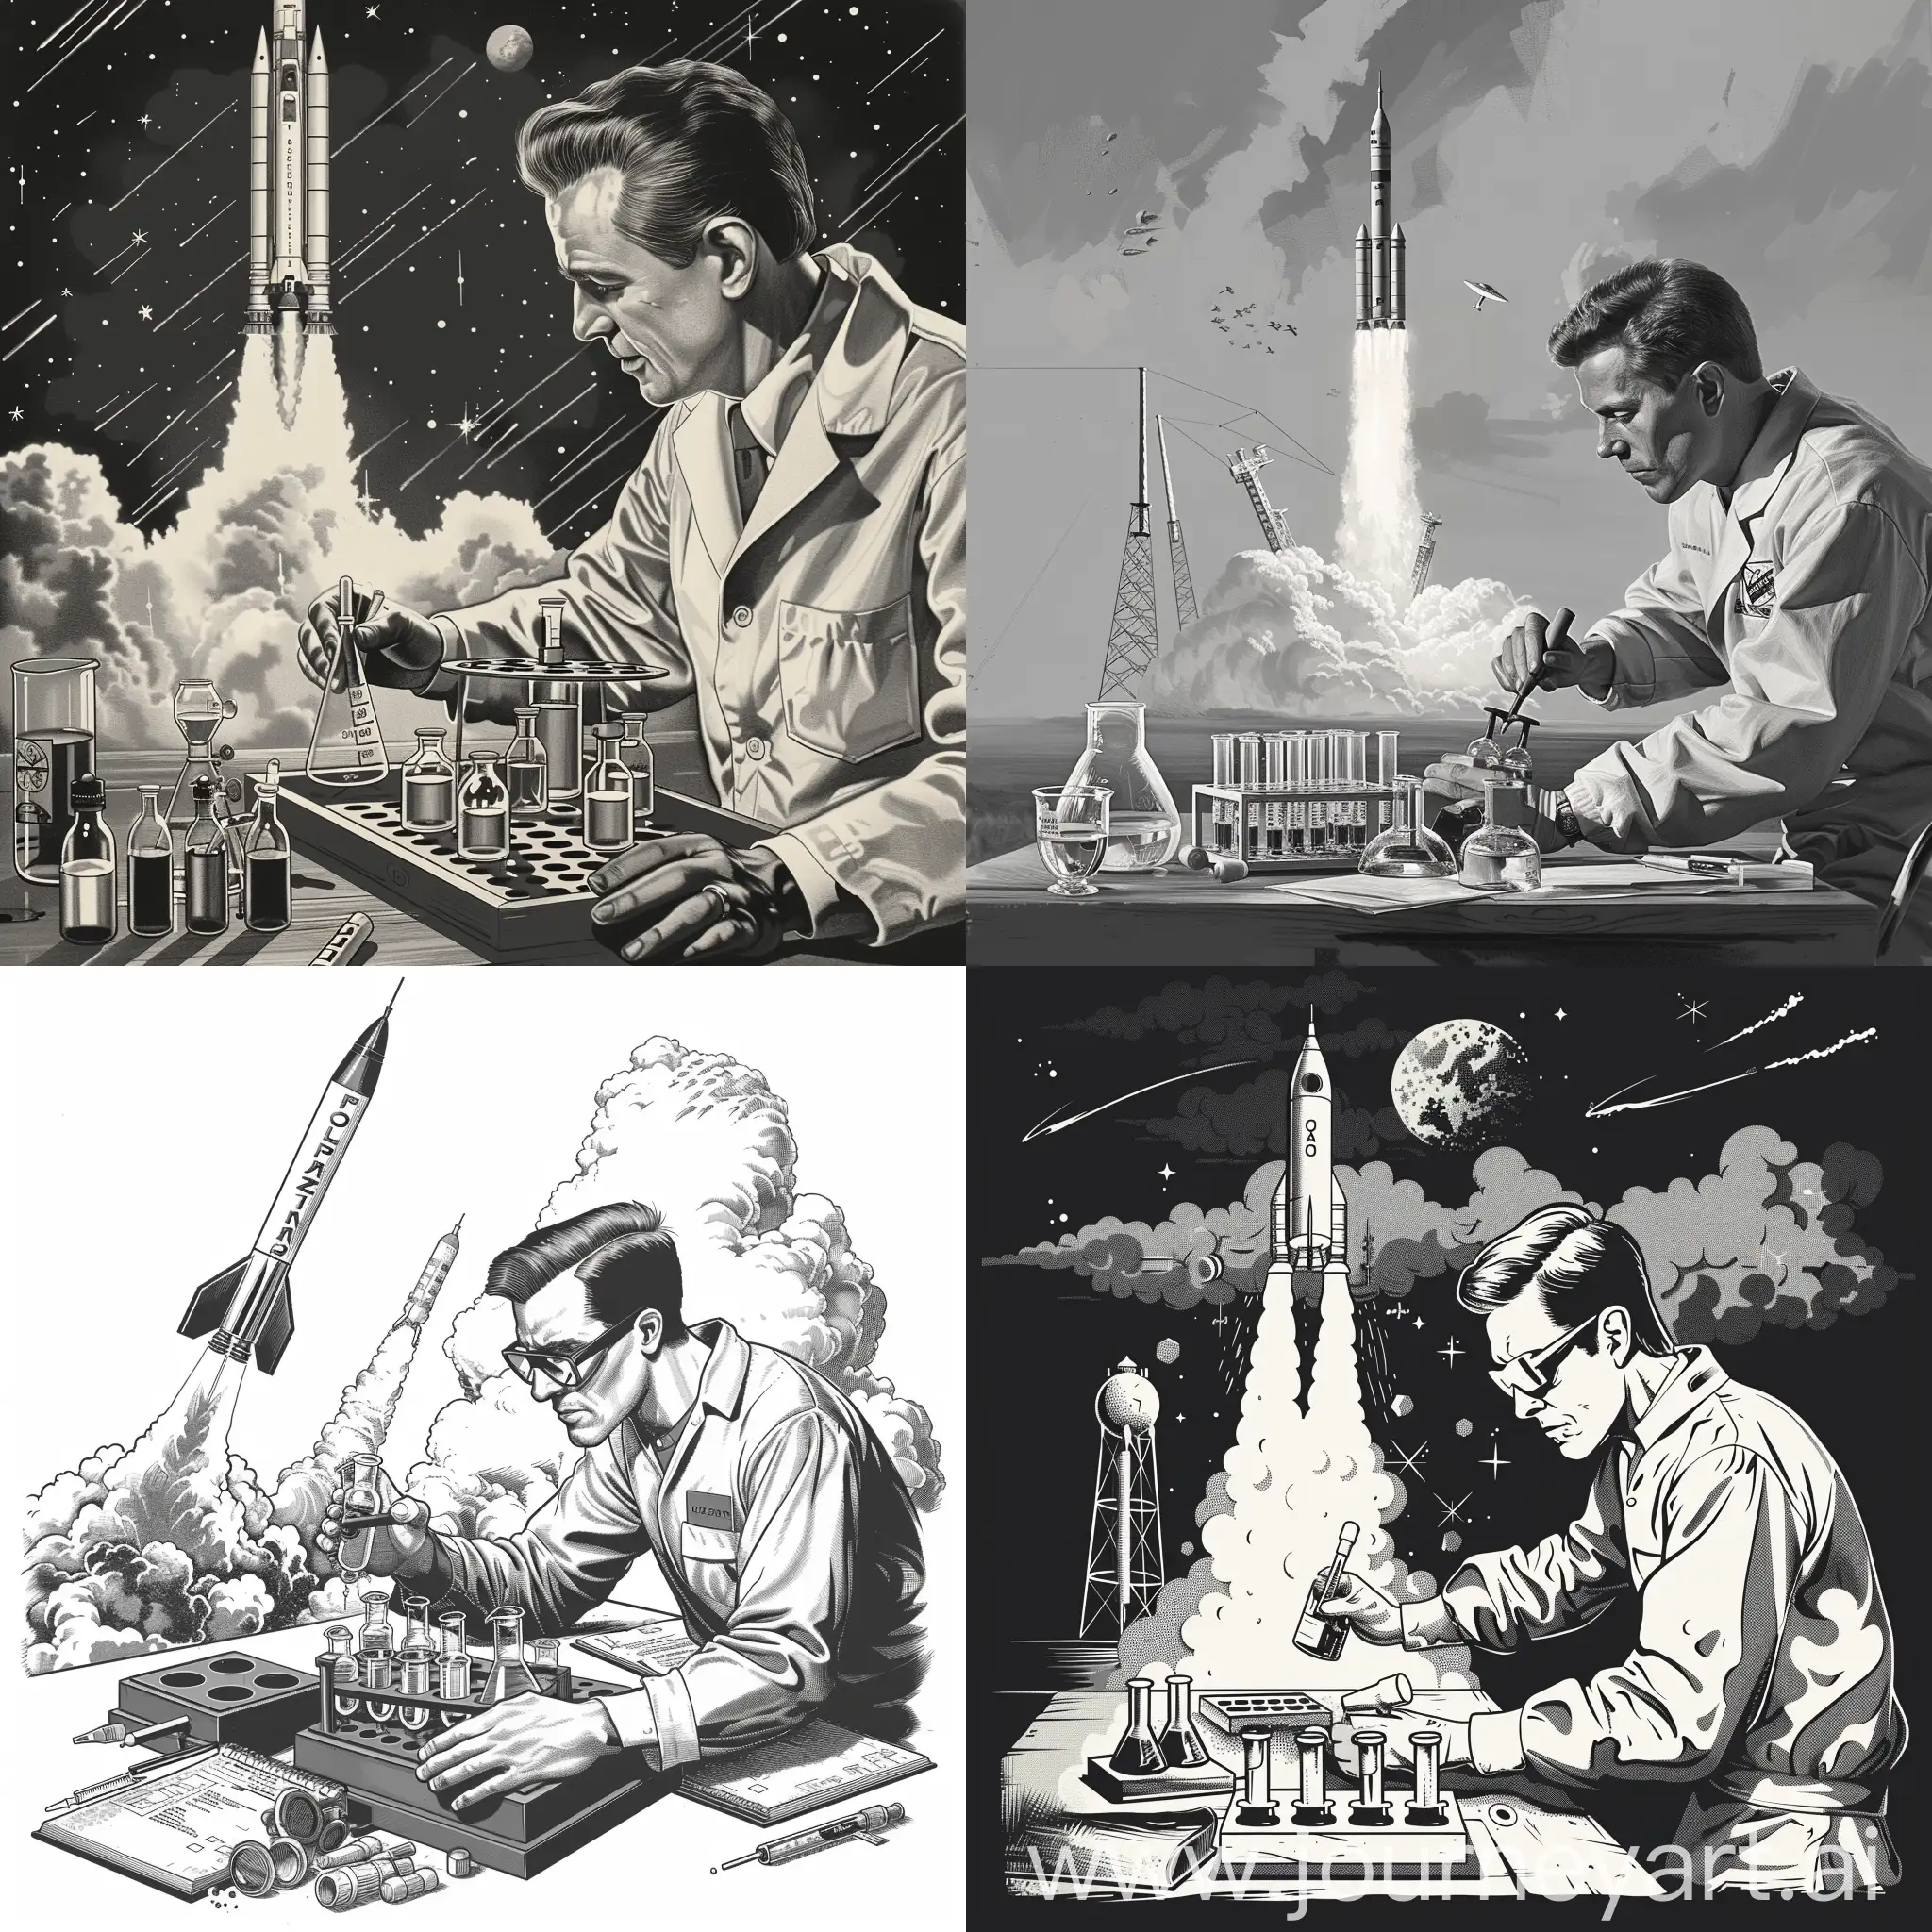 a scientist working with a chemistry set while a rocket launches behind him - black and white